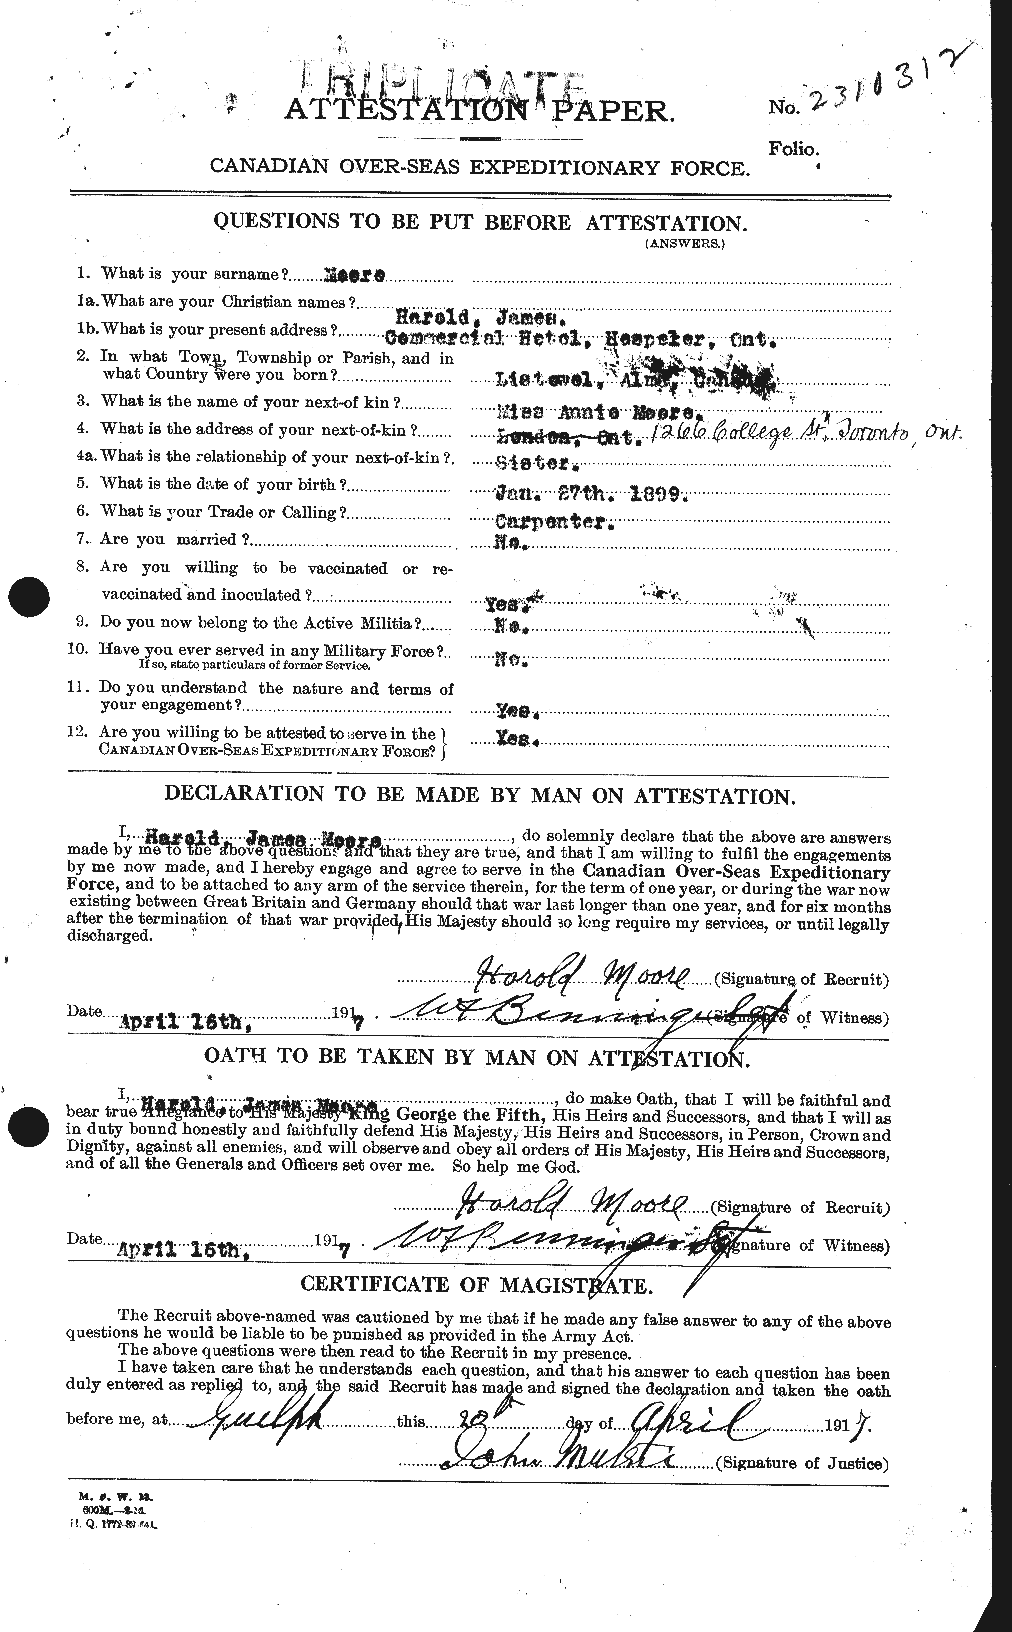 Personnel Records of the First World War - CEF 502064a